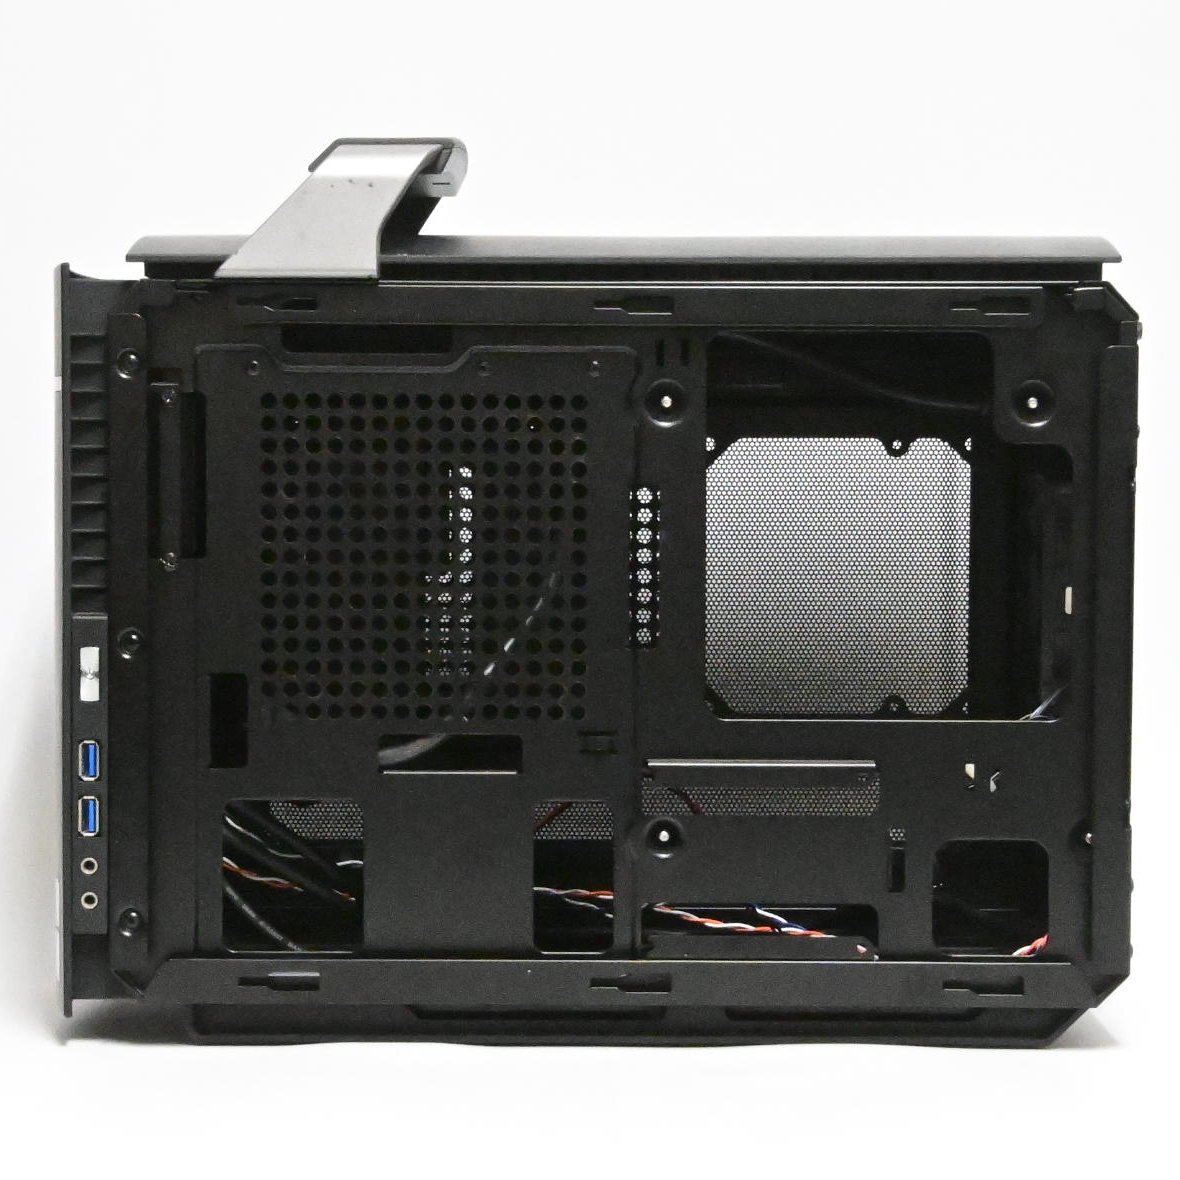  гарантия работы *PC кейс mini-ITX Mouse computer GTune compact tower *035